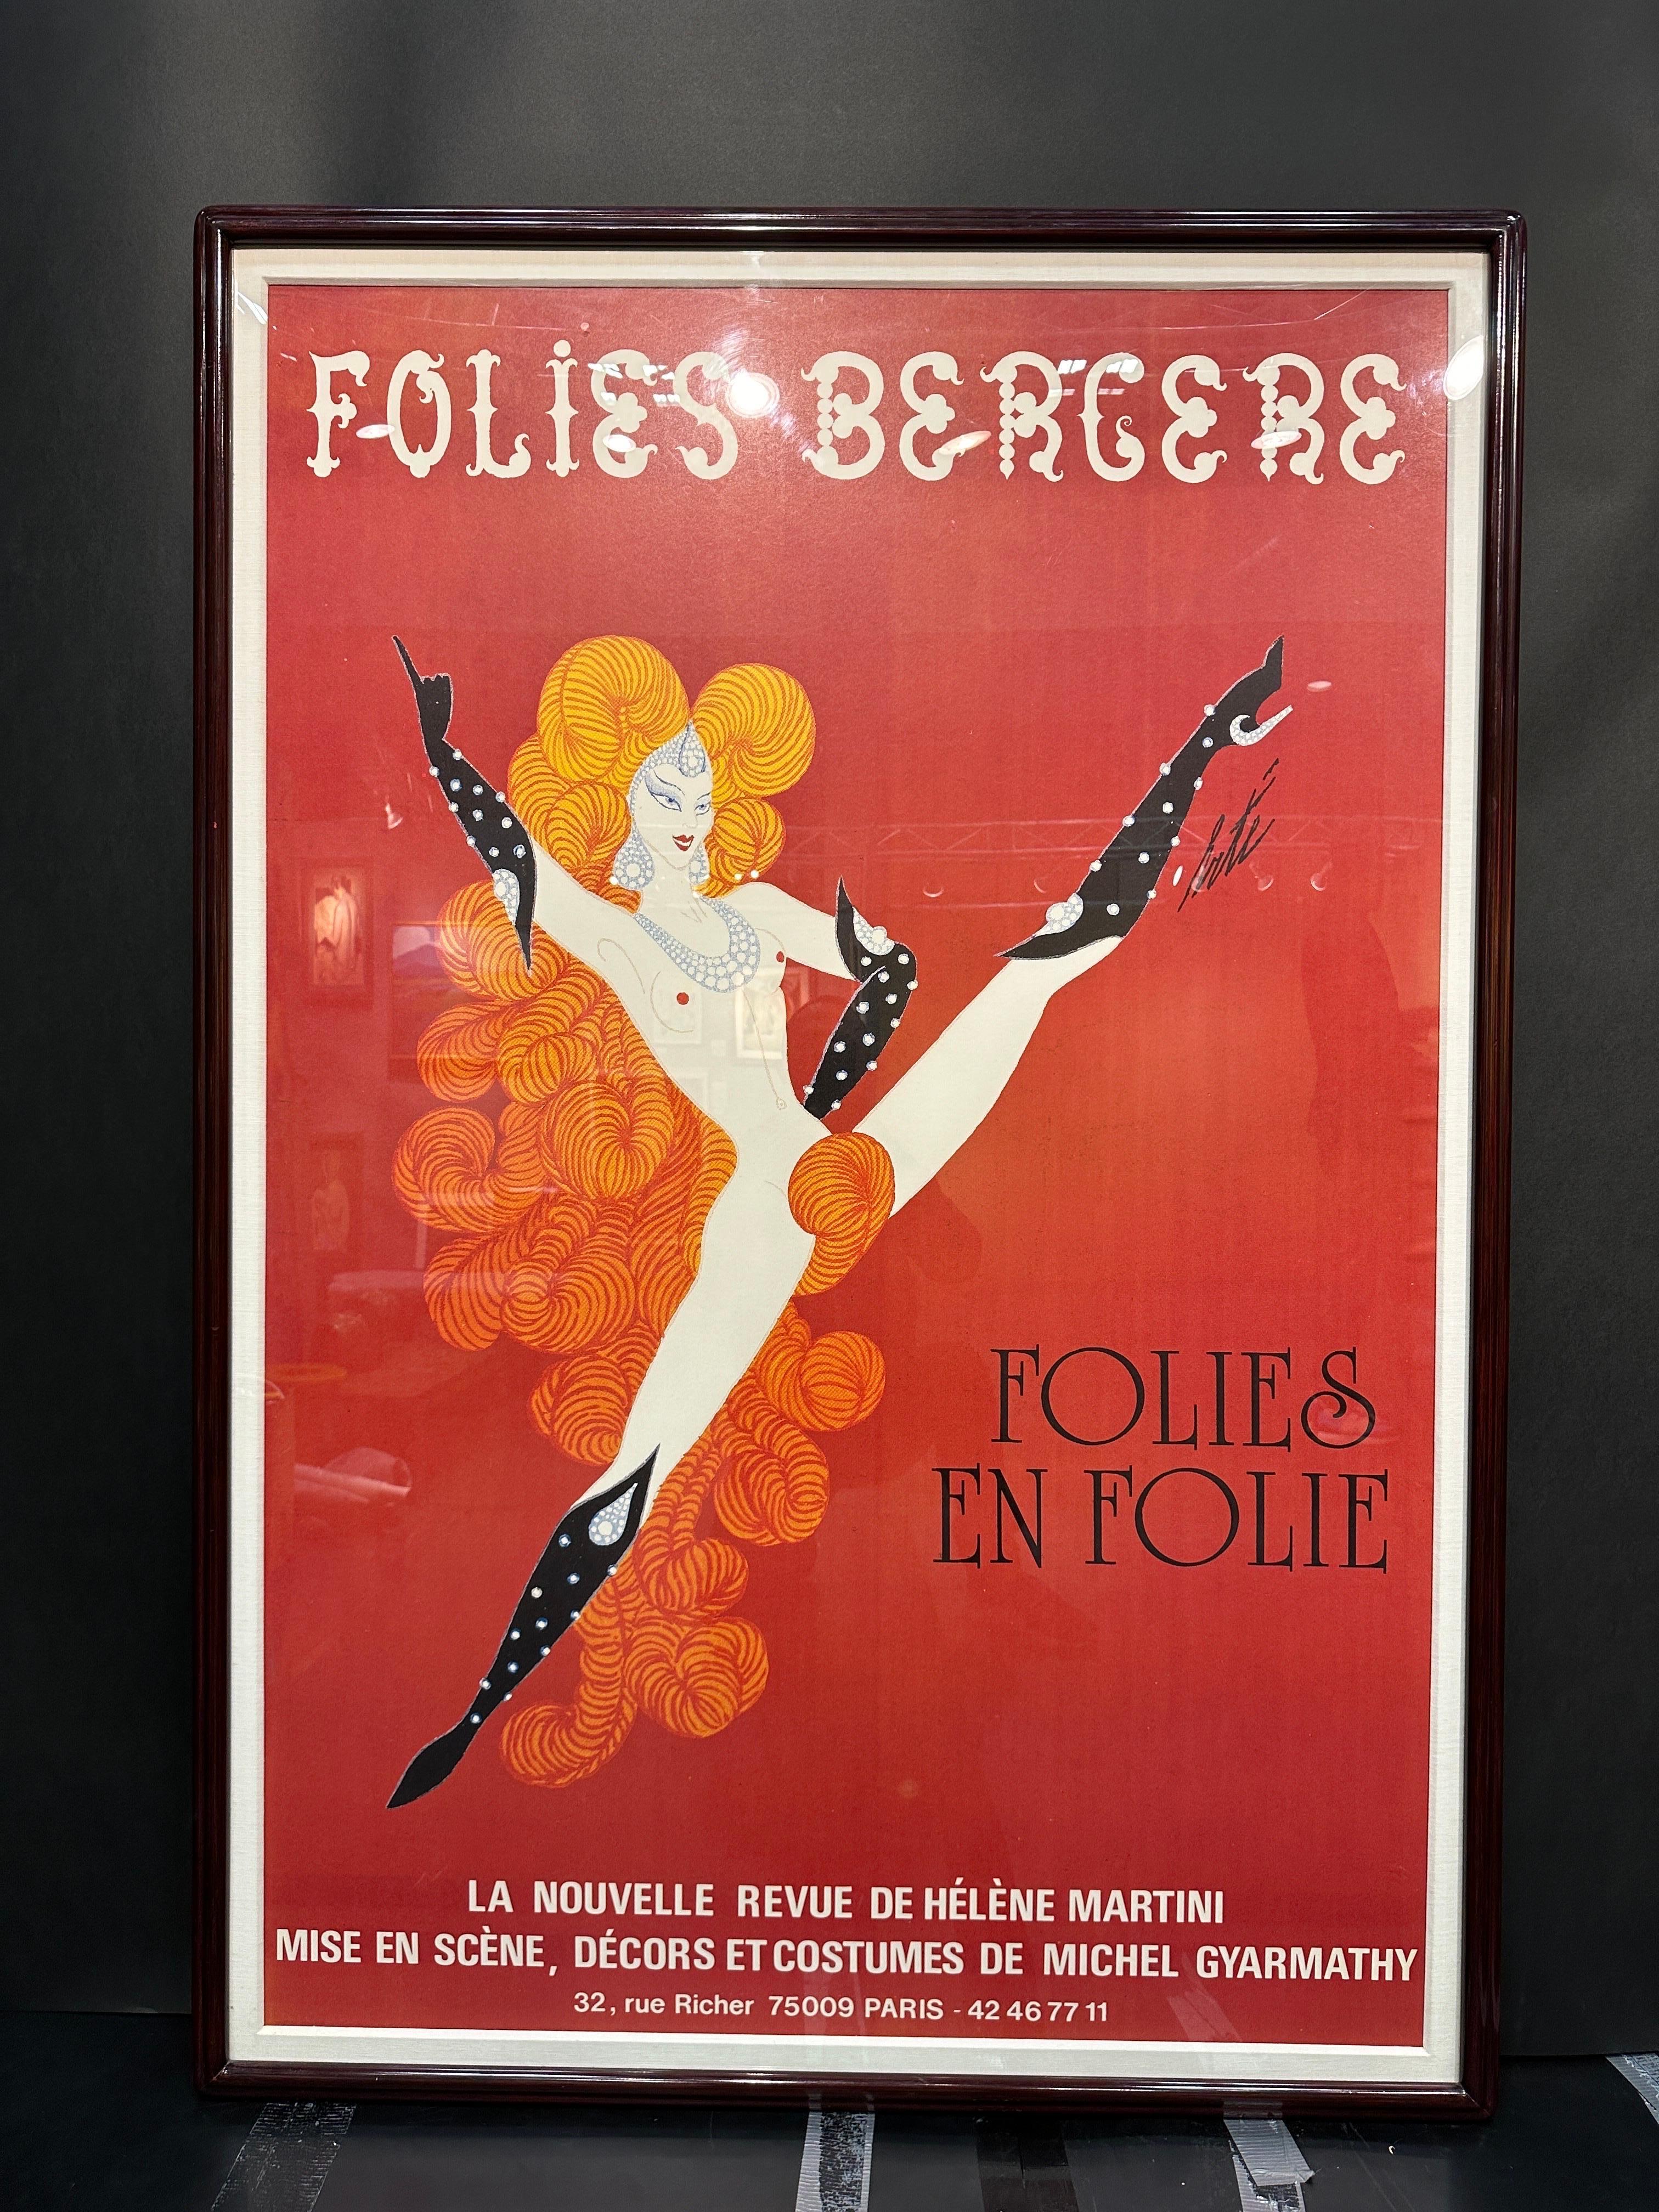 Cabaret Folis Bergere advertising framed poster designed by ERTE. Poster is linen backed and protected behind acrylic sheet.  Comes with certificate of authenticity.